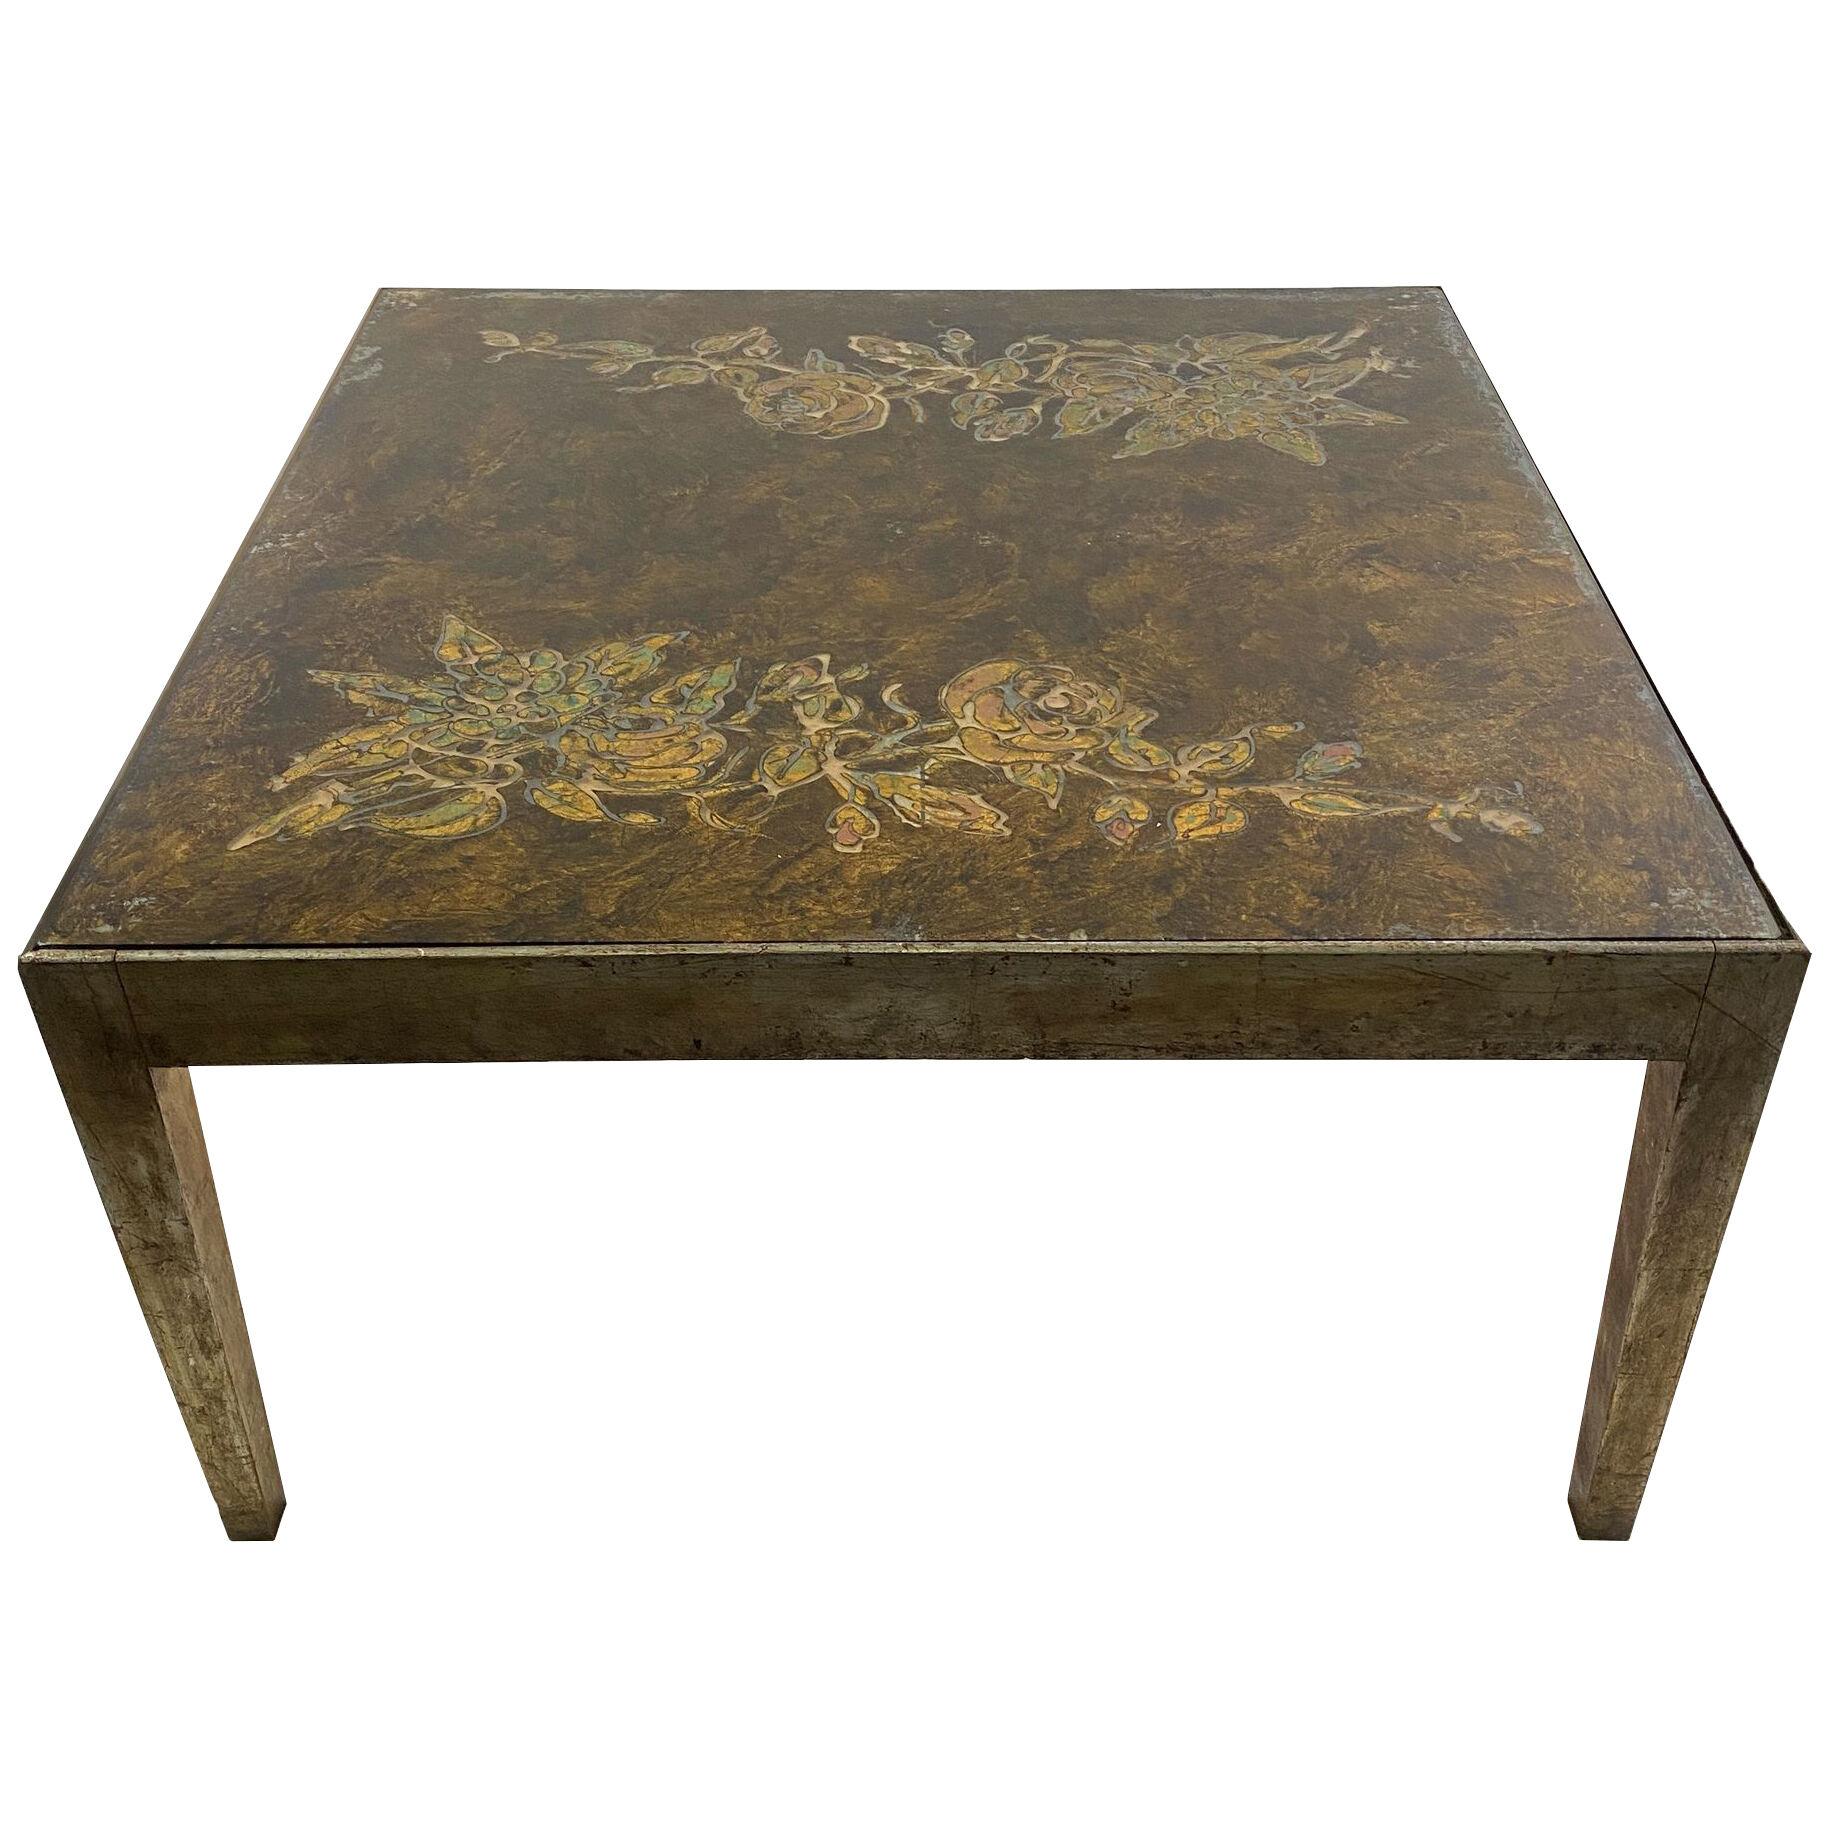 Italian Modern Silver Gilt and Eglomise' Glass Coffee Table, Max Ingrand